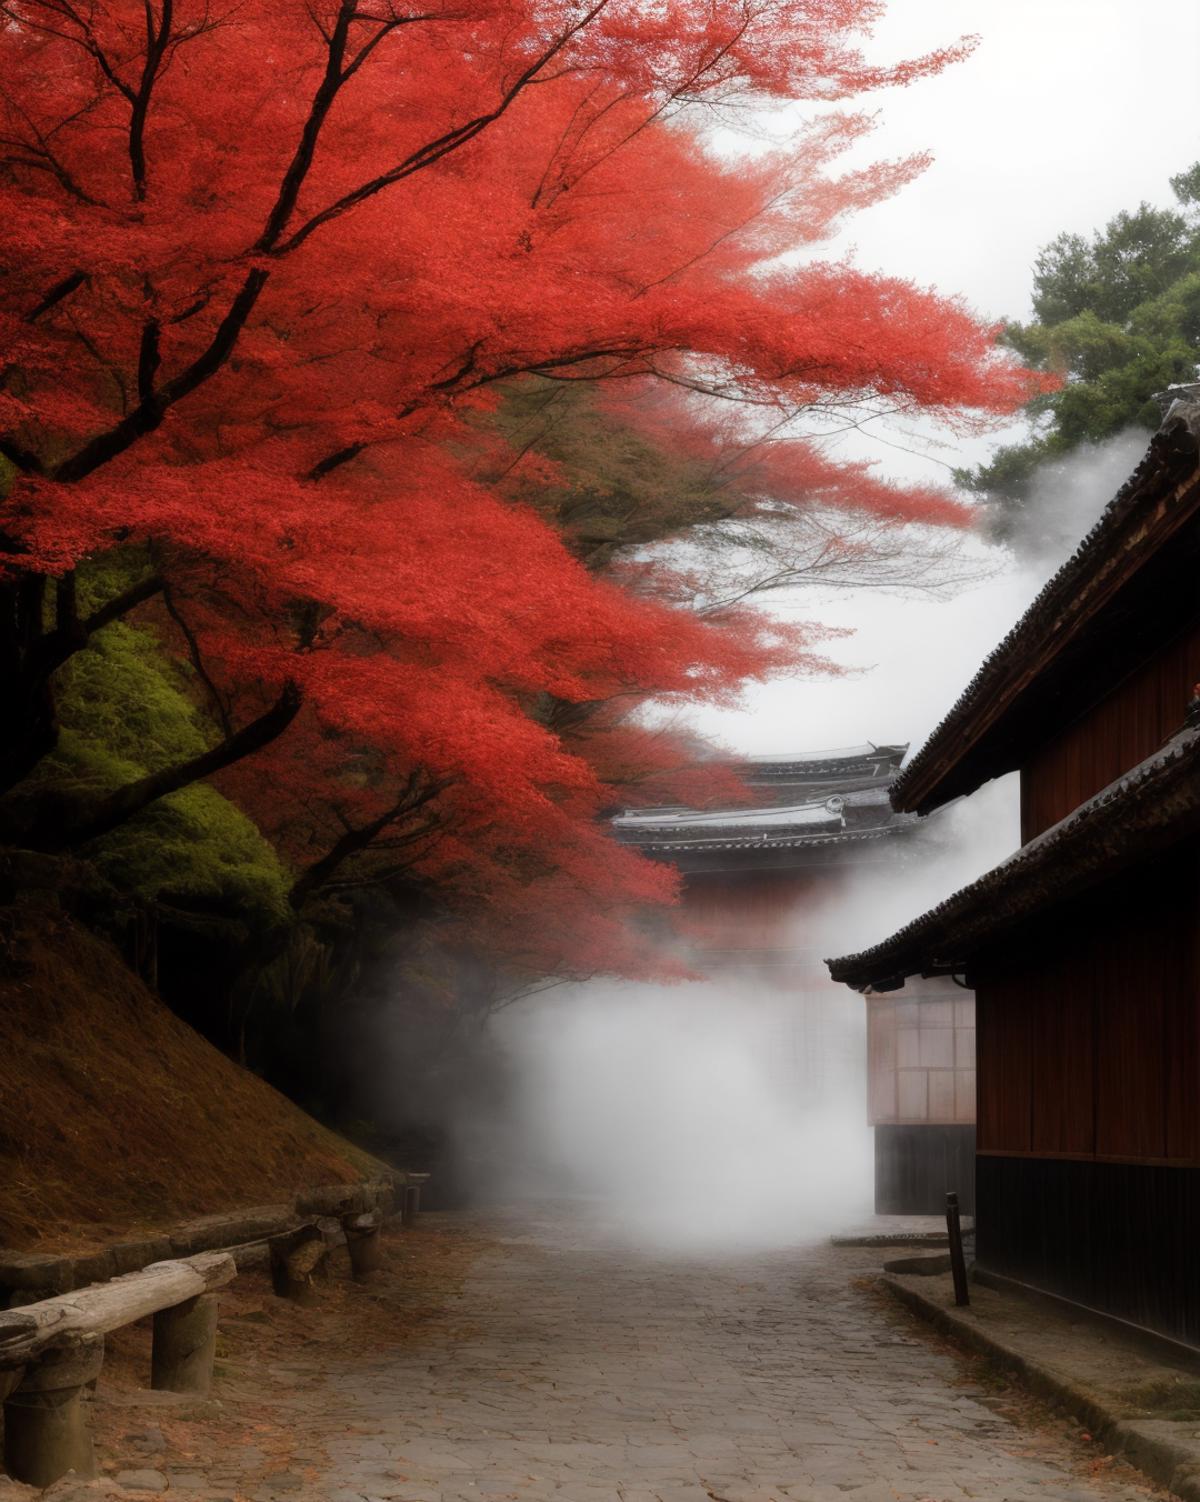 Ancient Japanese Village MicroLyCO (half-wilderness half-countryside) image by TopazStudio